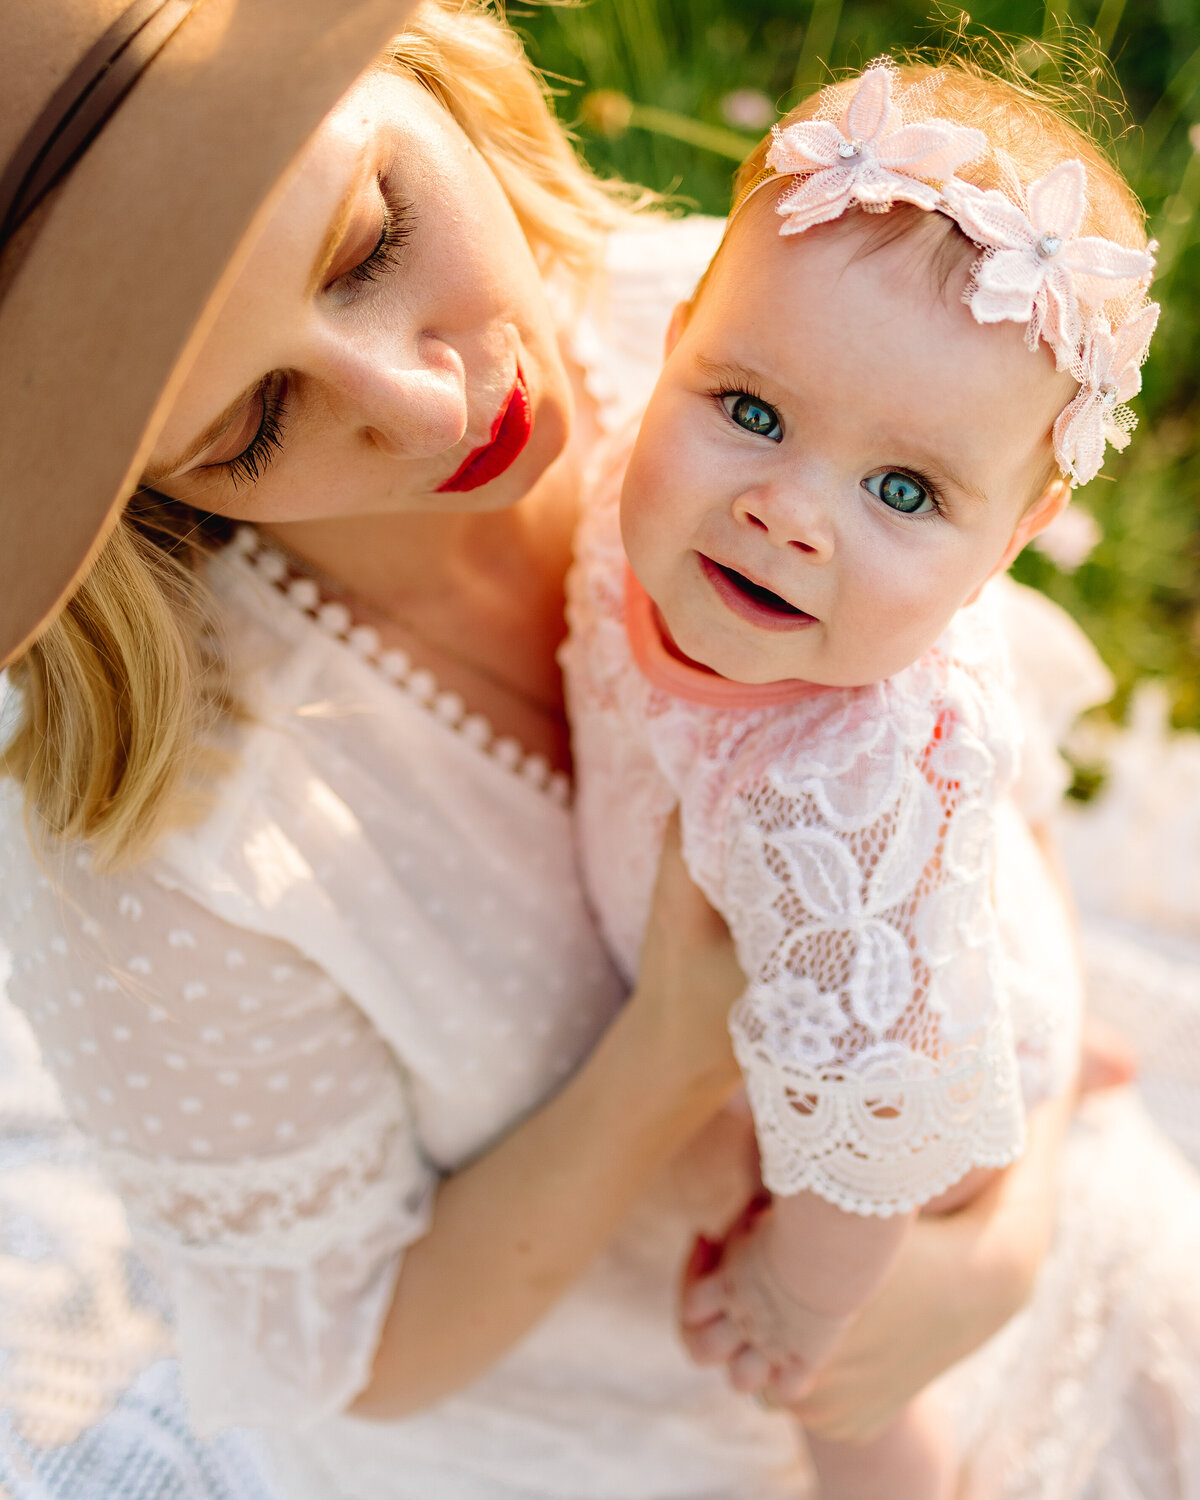 Picture of a woman with a baby, she is watching her she has a brown hat and red lips is holding the baby looking at the camera. The baby has blue eyes and on her head has a headband with light pink flowers